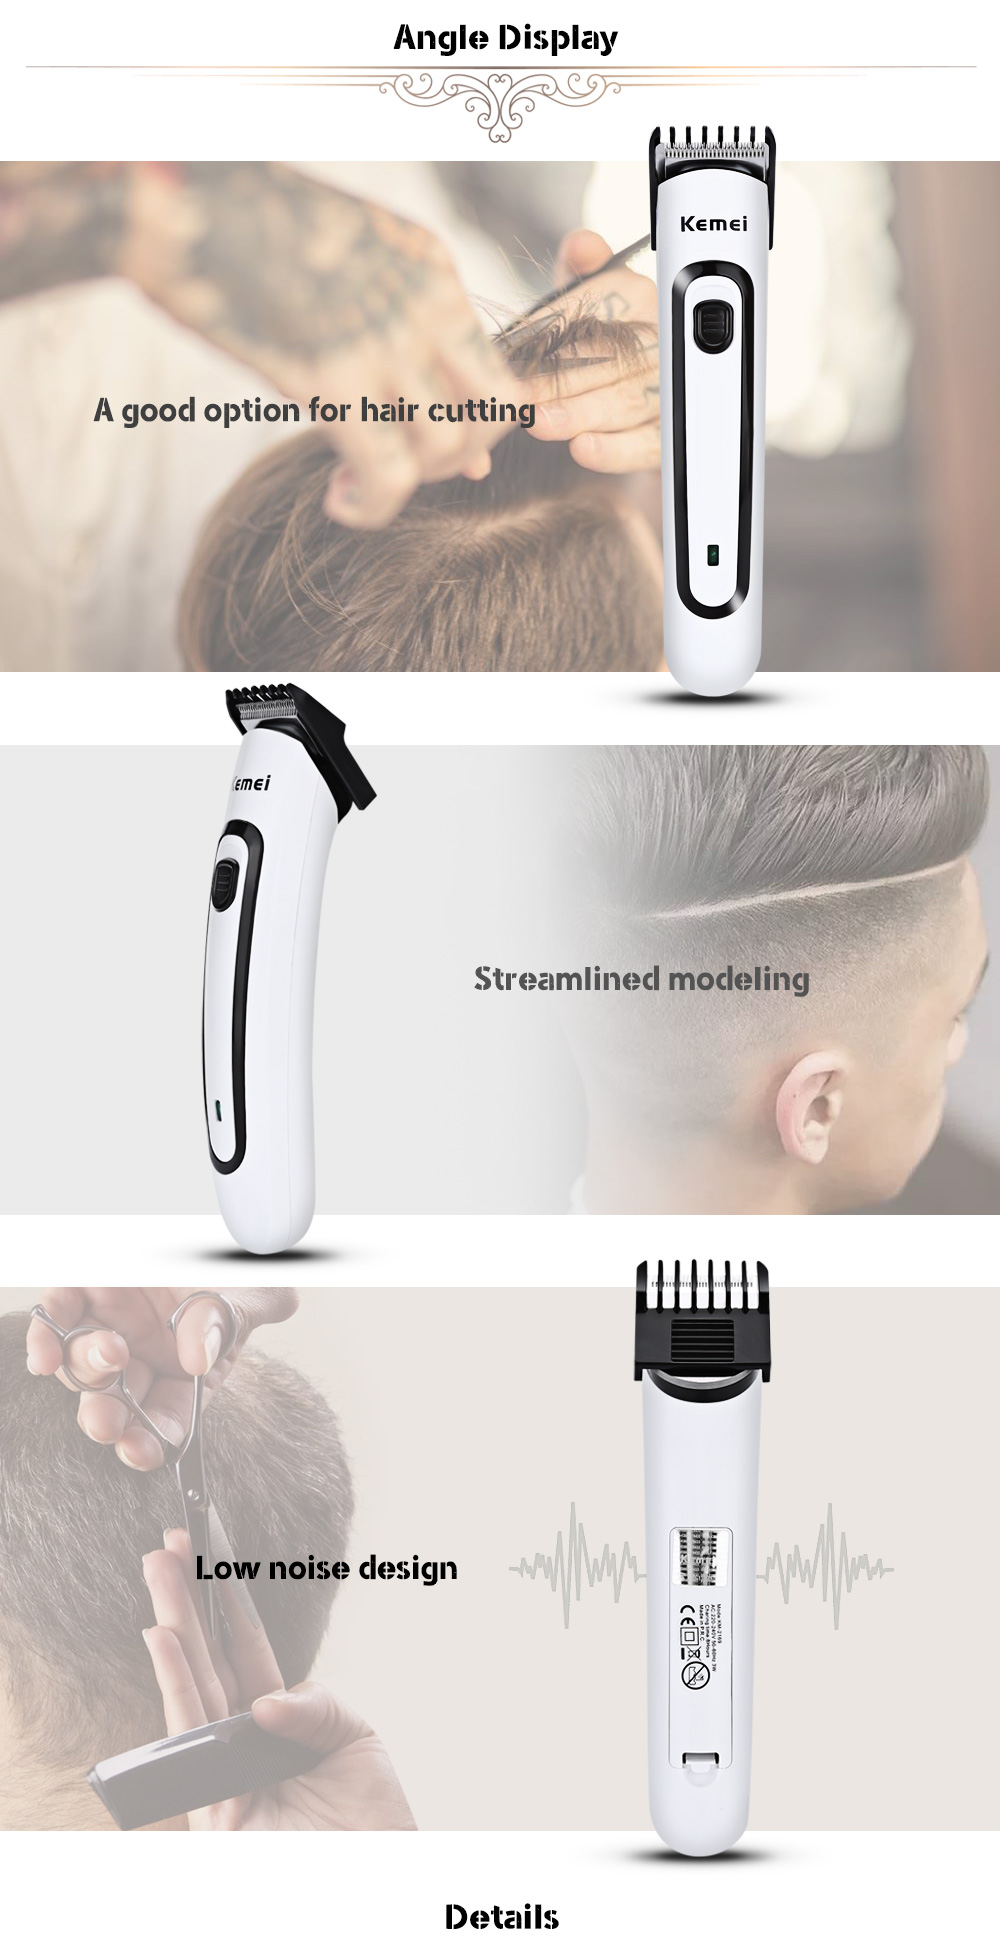 Kemei KM-2169 Dry Dattery Chargeable Dual-Use Electric Hair Clipper Hair Clipper